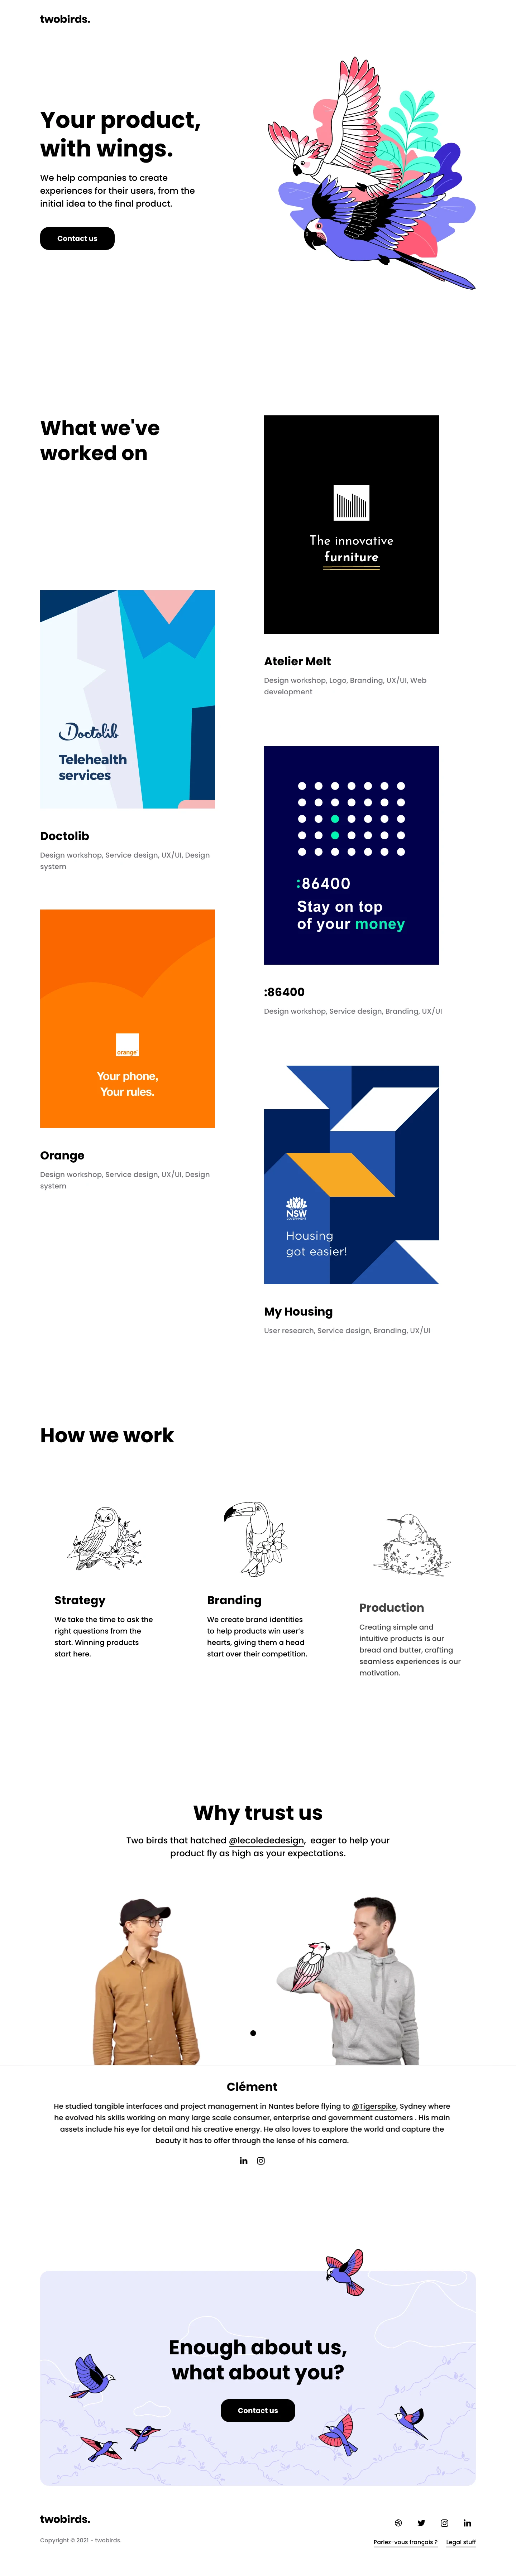 twobirds. Landing Page Example: Your product, with wings. We help companies to create experiences for their users, from the initial idea to the final product.